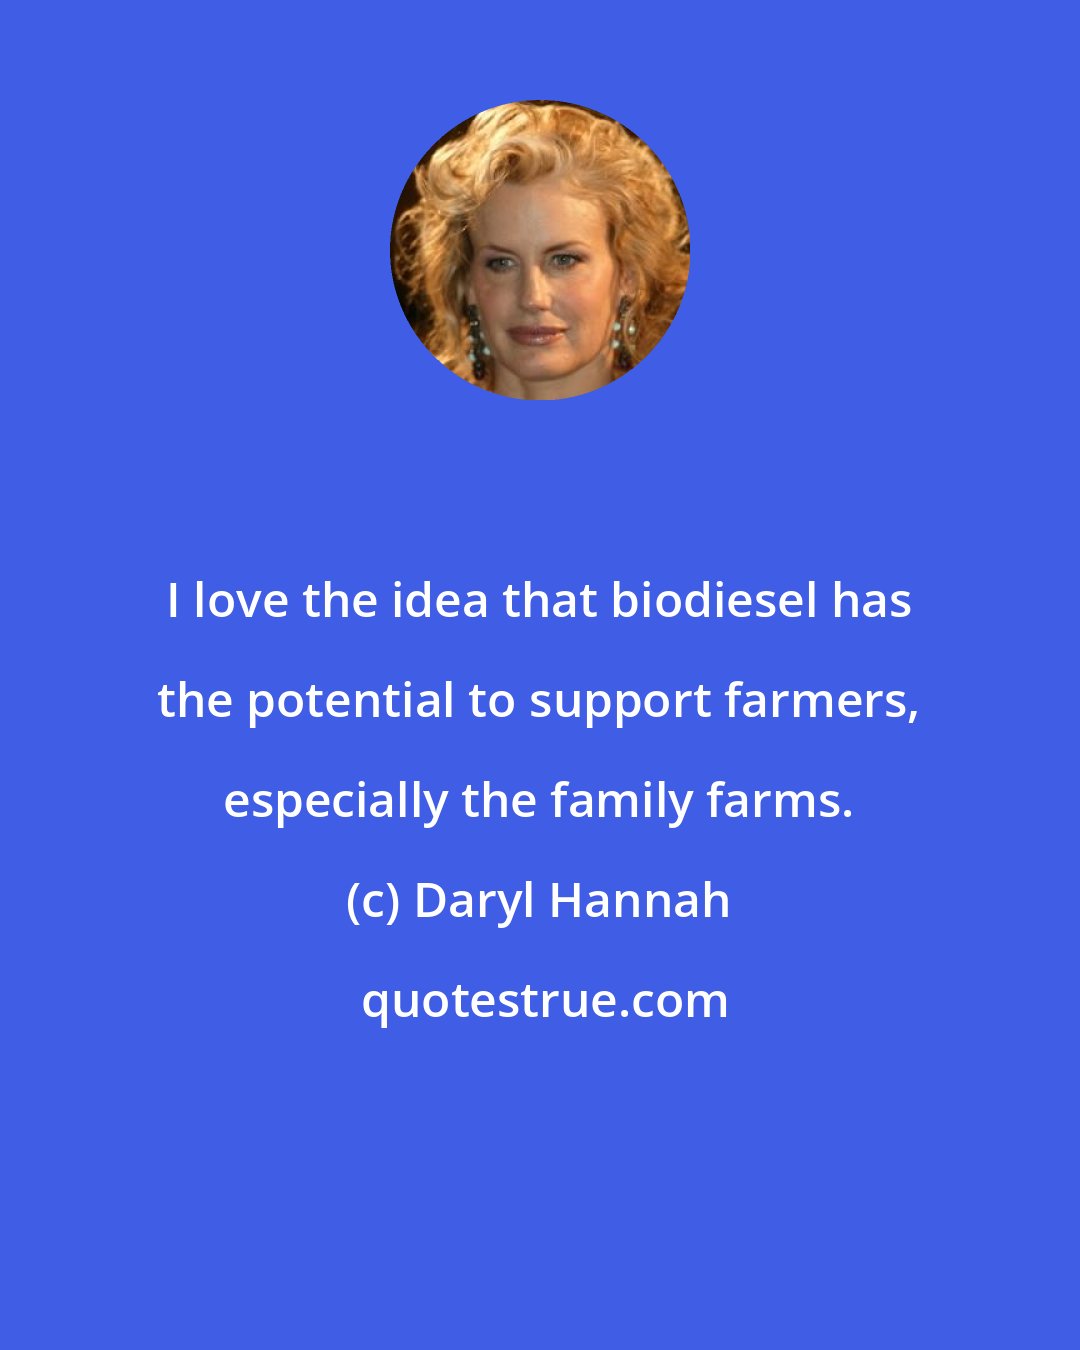 Daryl Hannah: I love the idea that biodiesel has the potential to support farmers, especially the family farms.